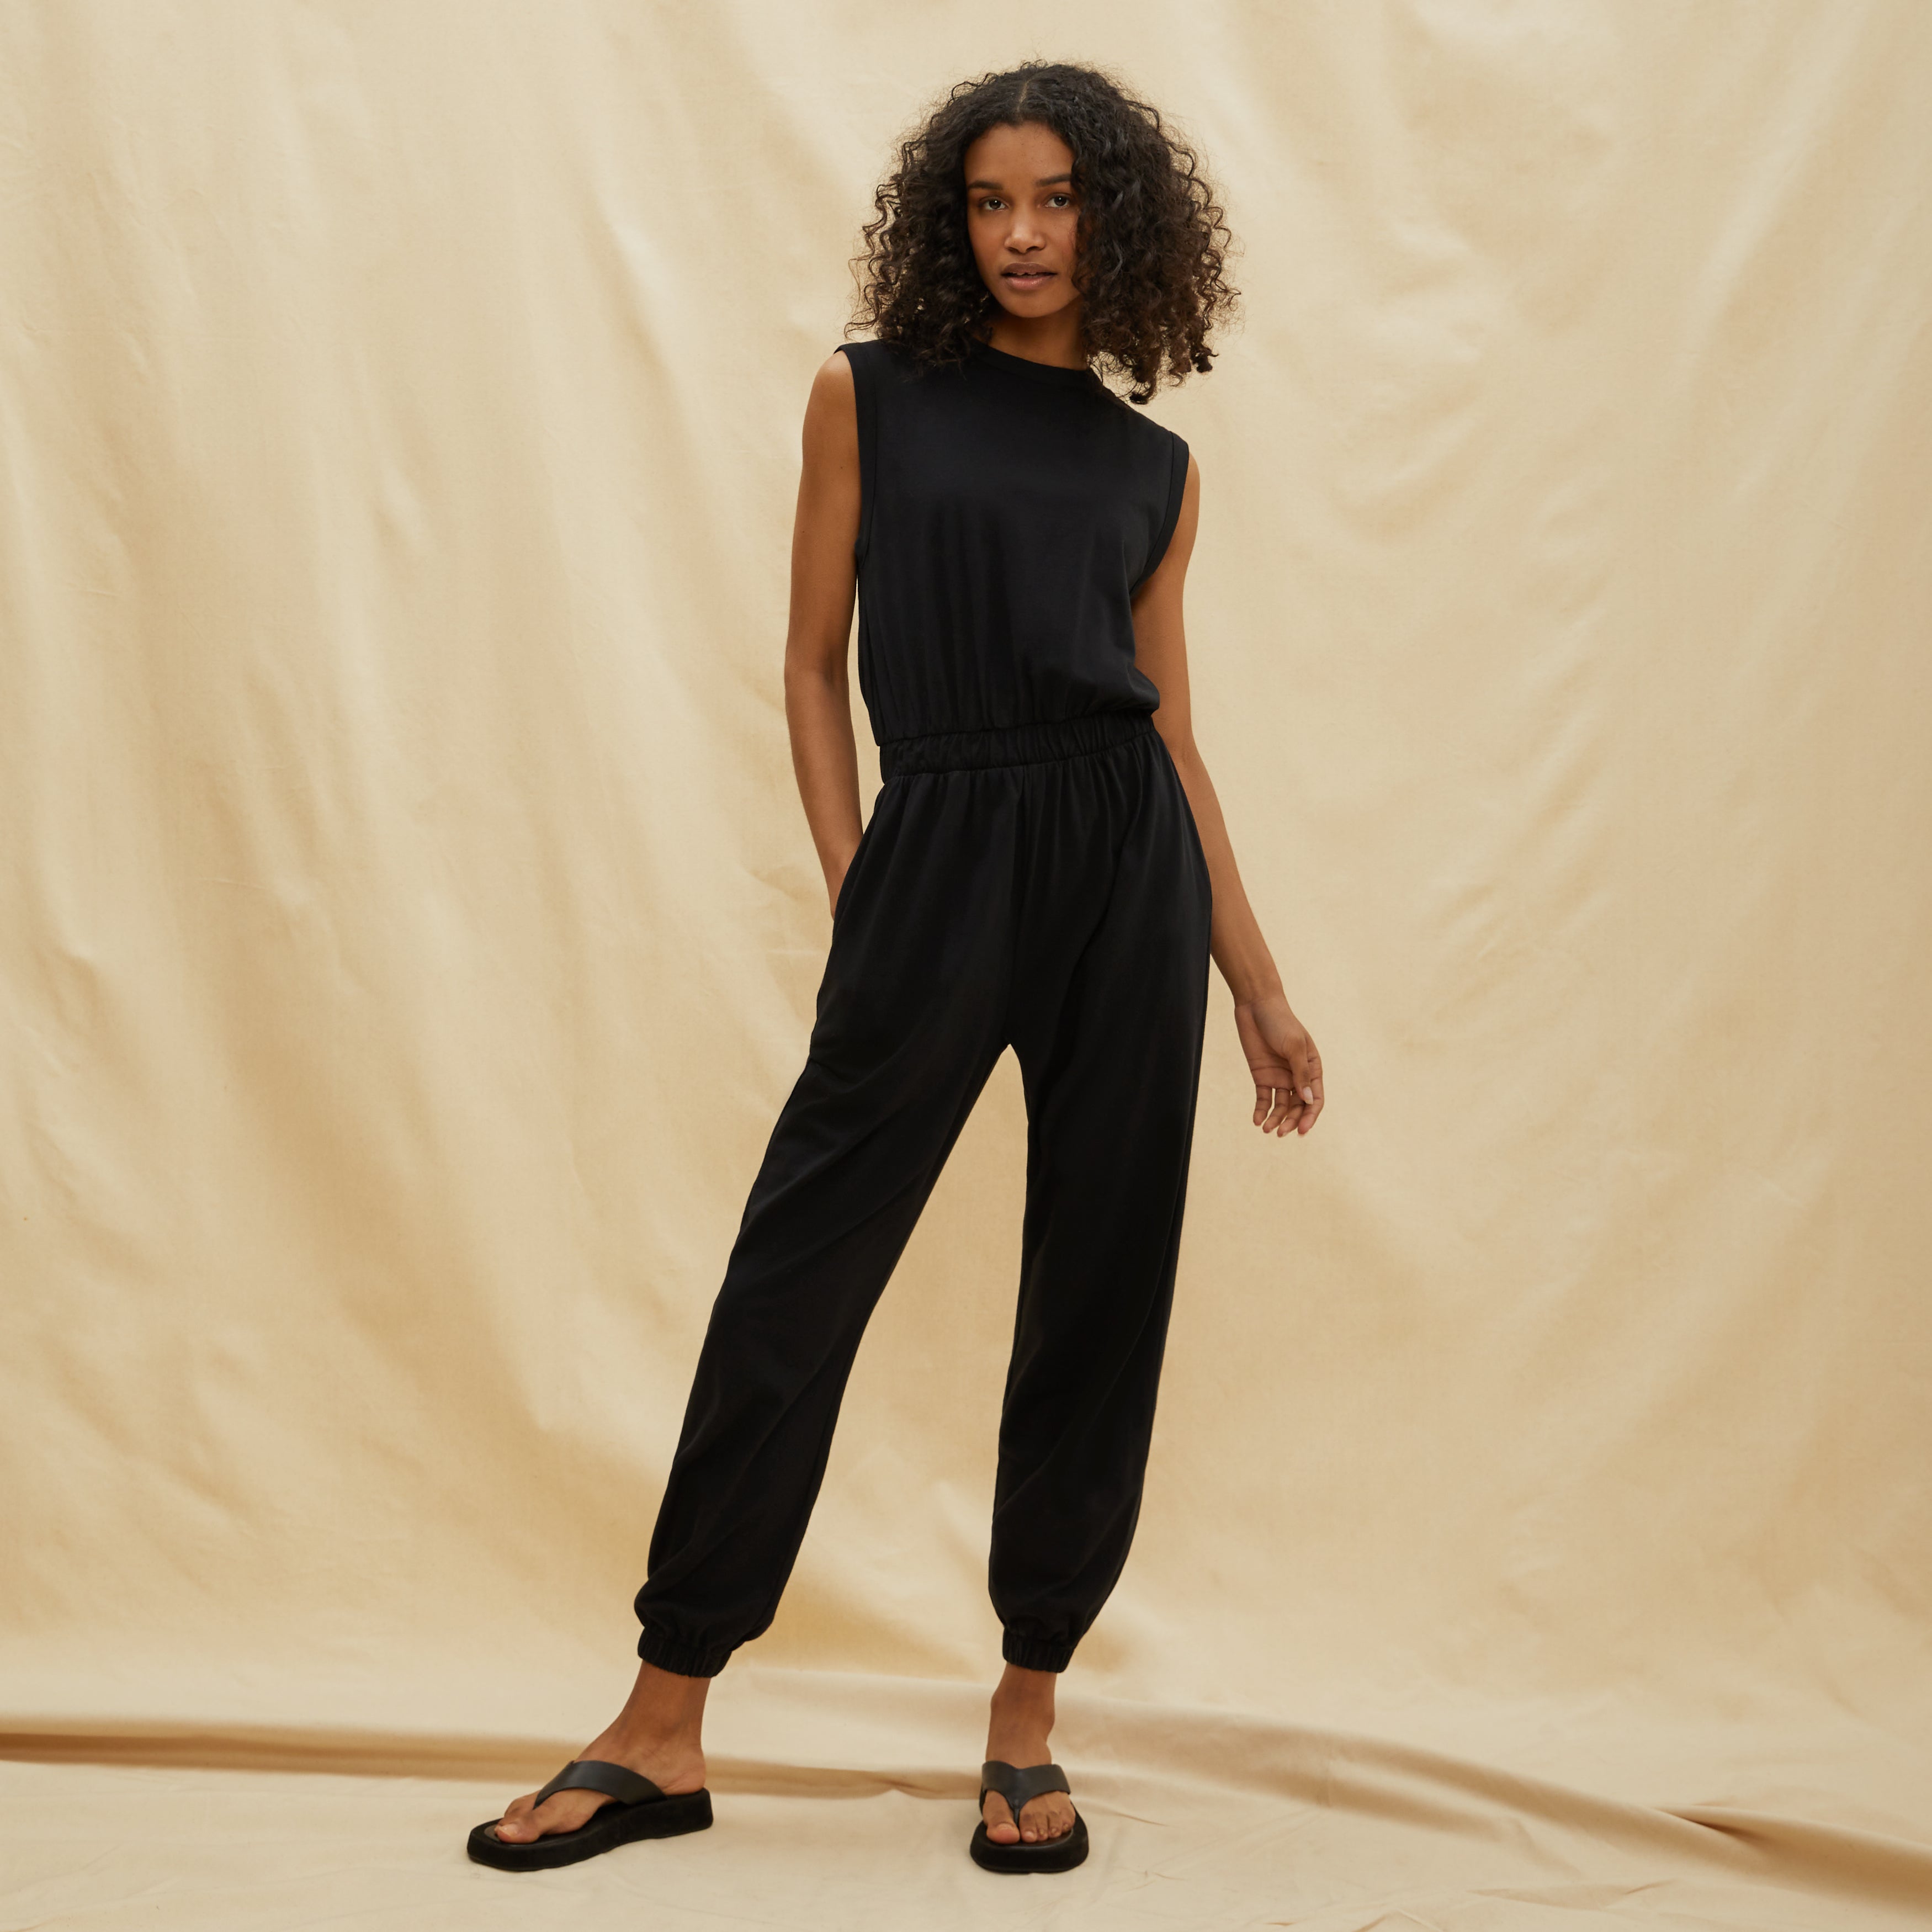 Transition Season: The Perfect Jumpsuit [On Sale Today!!]